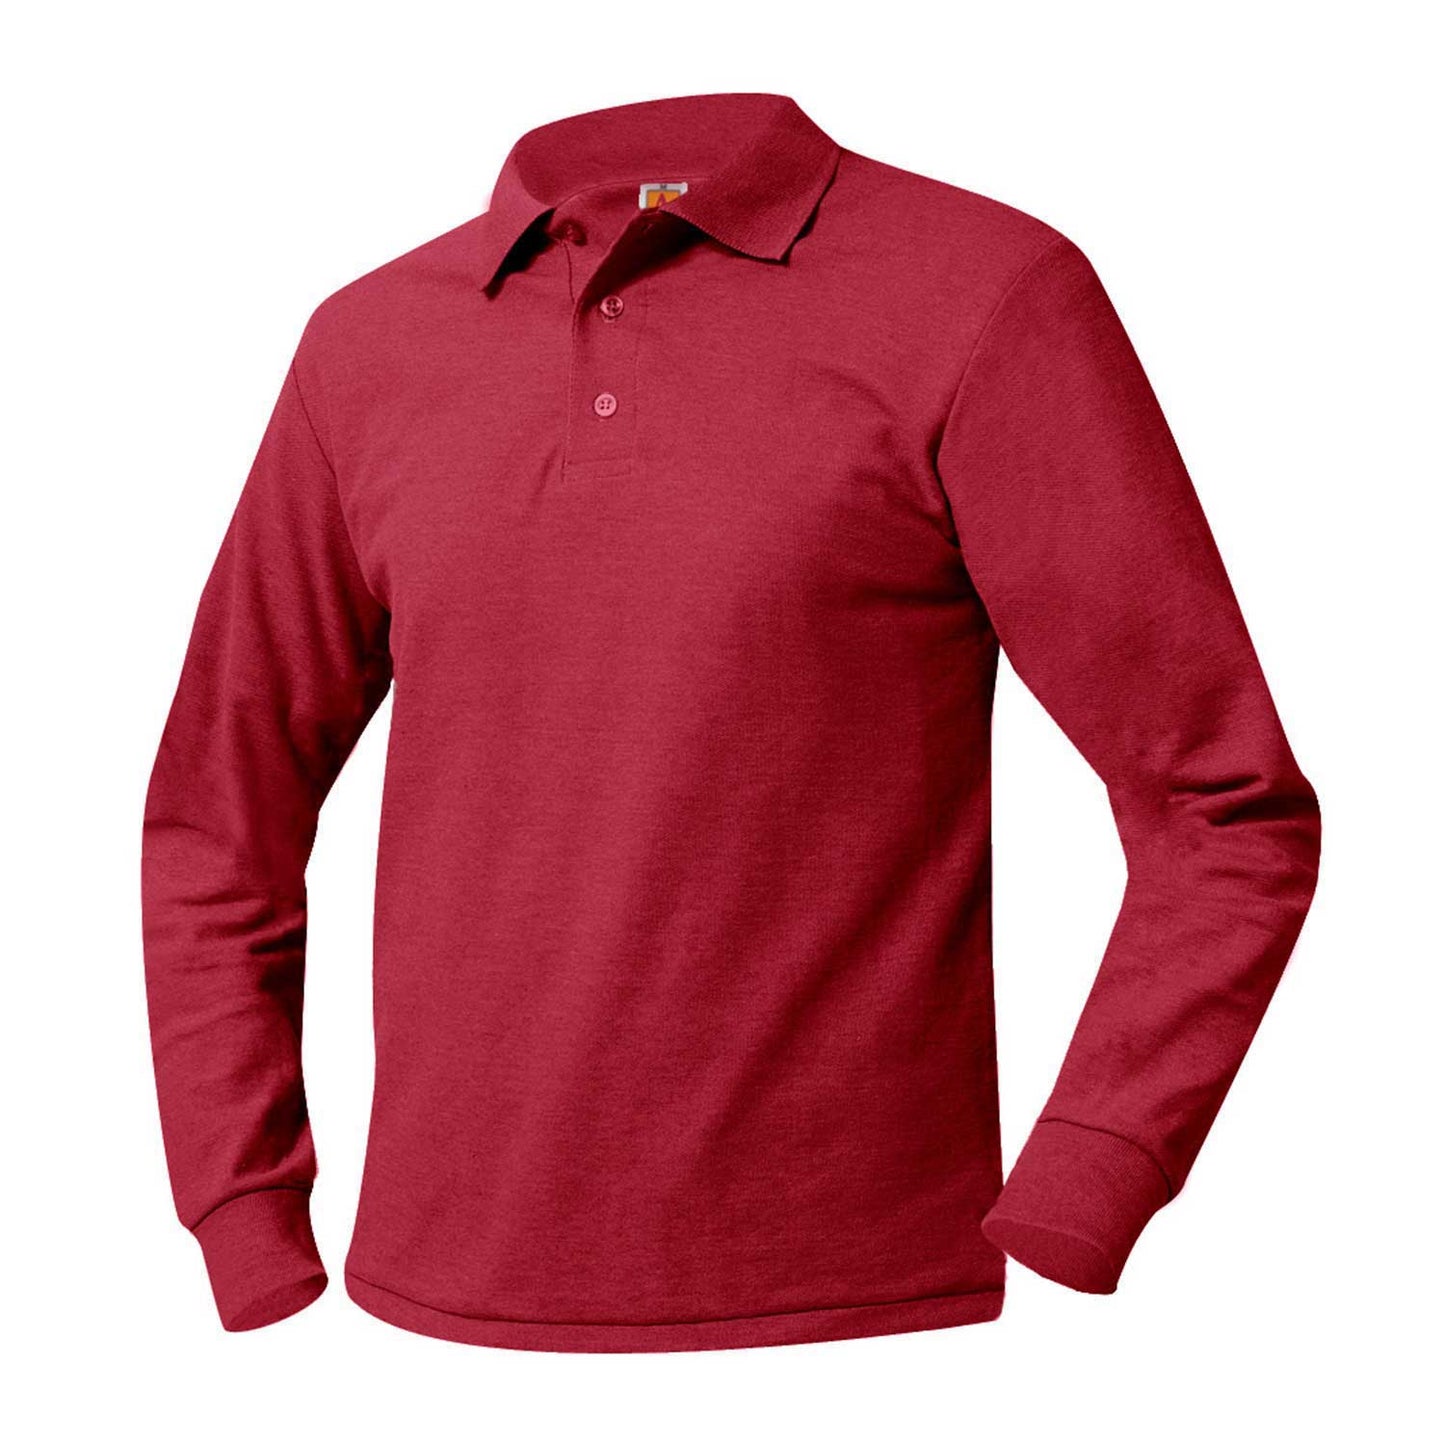 Unisex Long Sleeve Pique Polo-Red